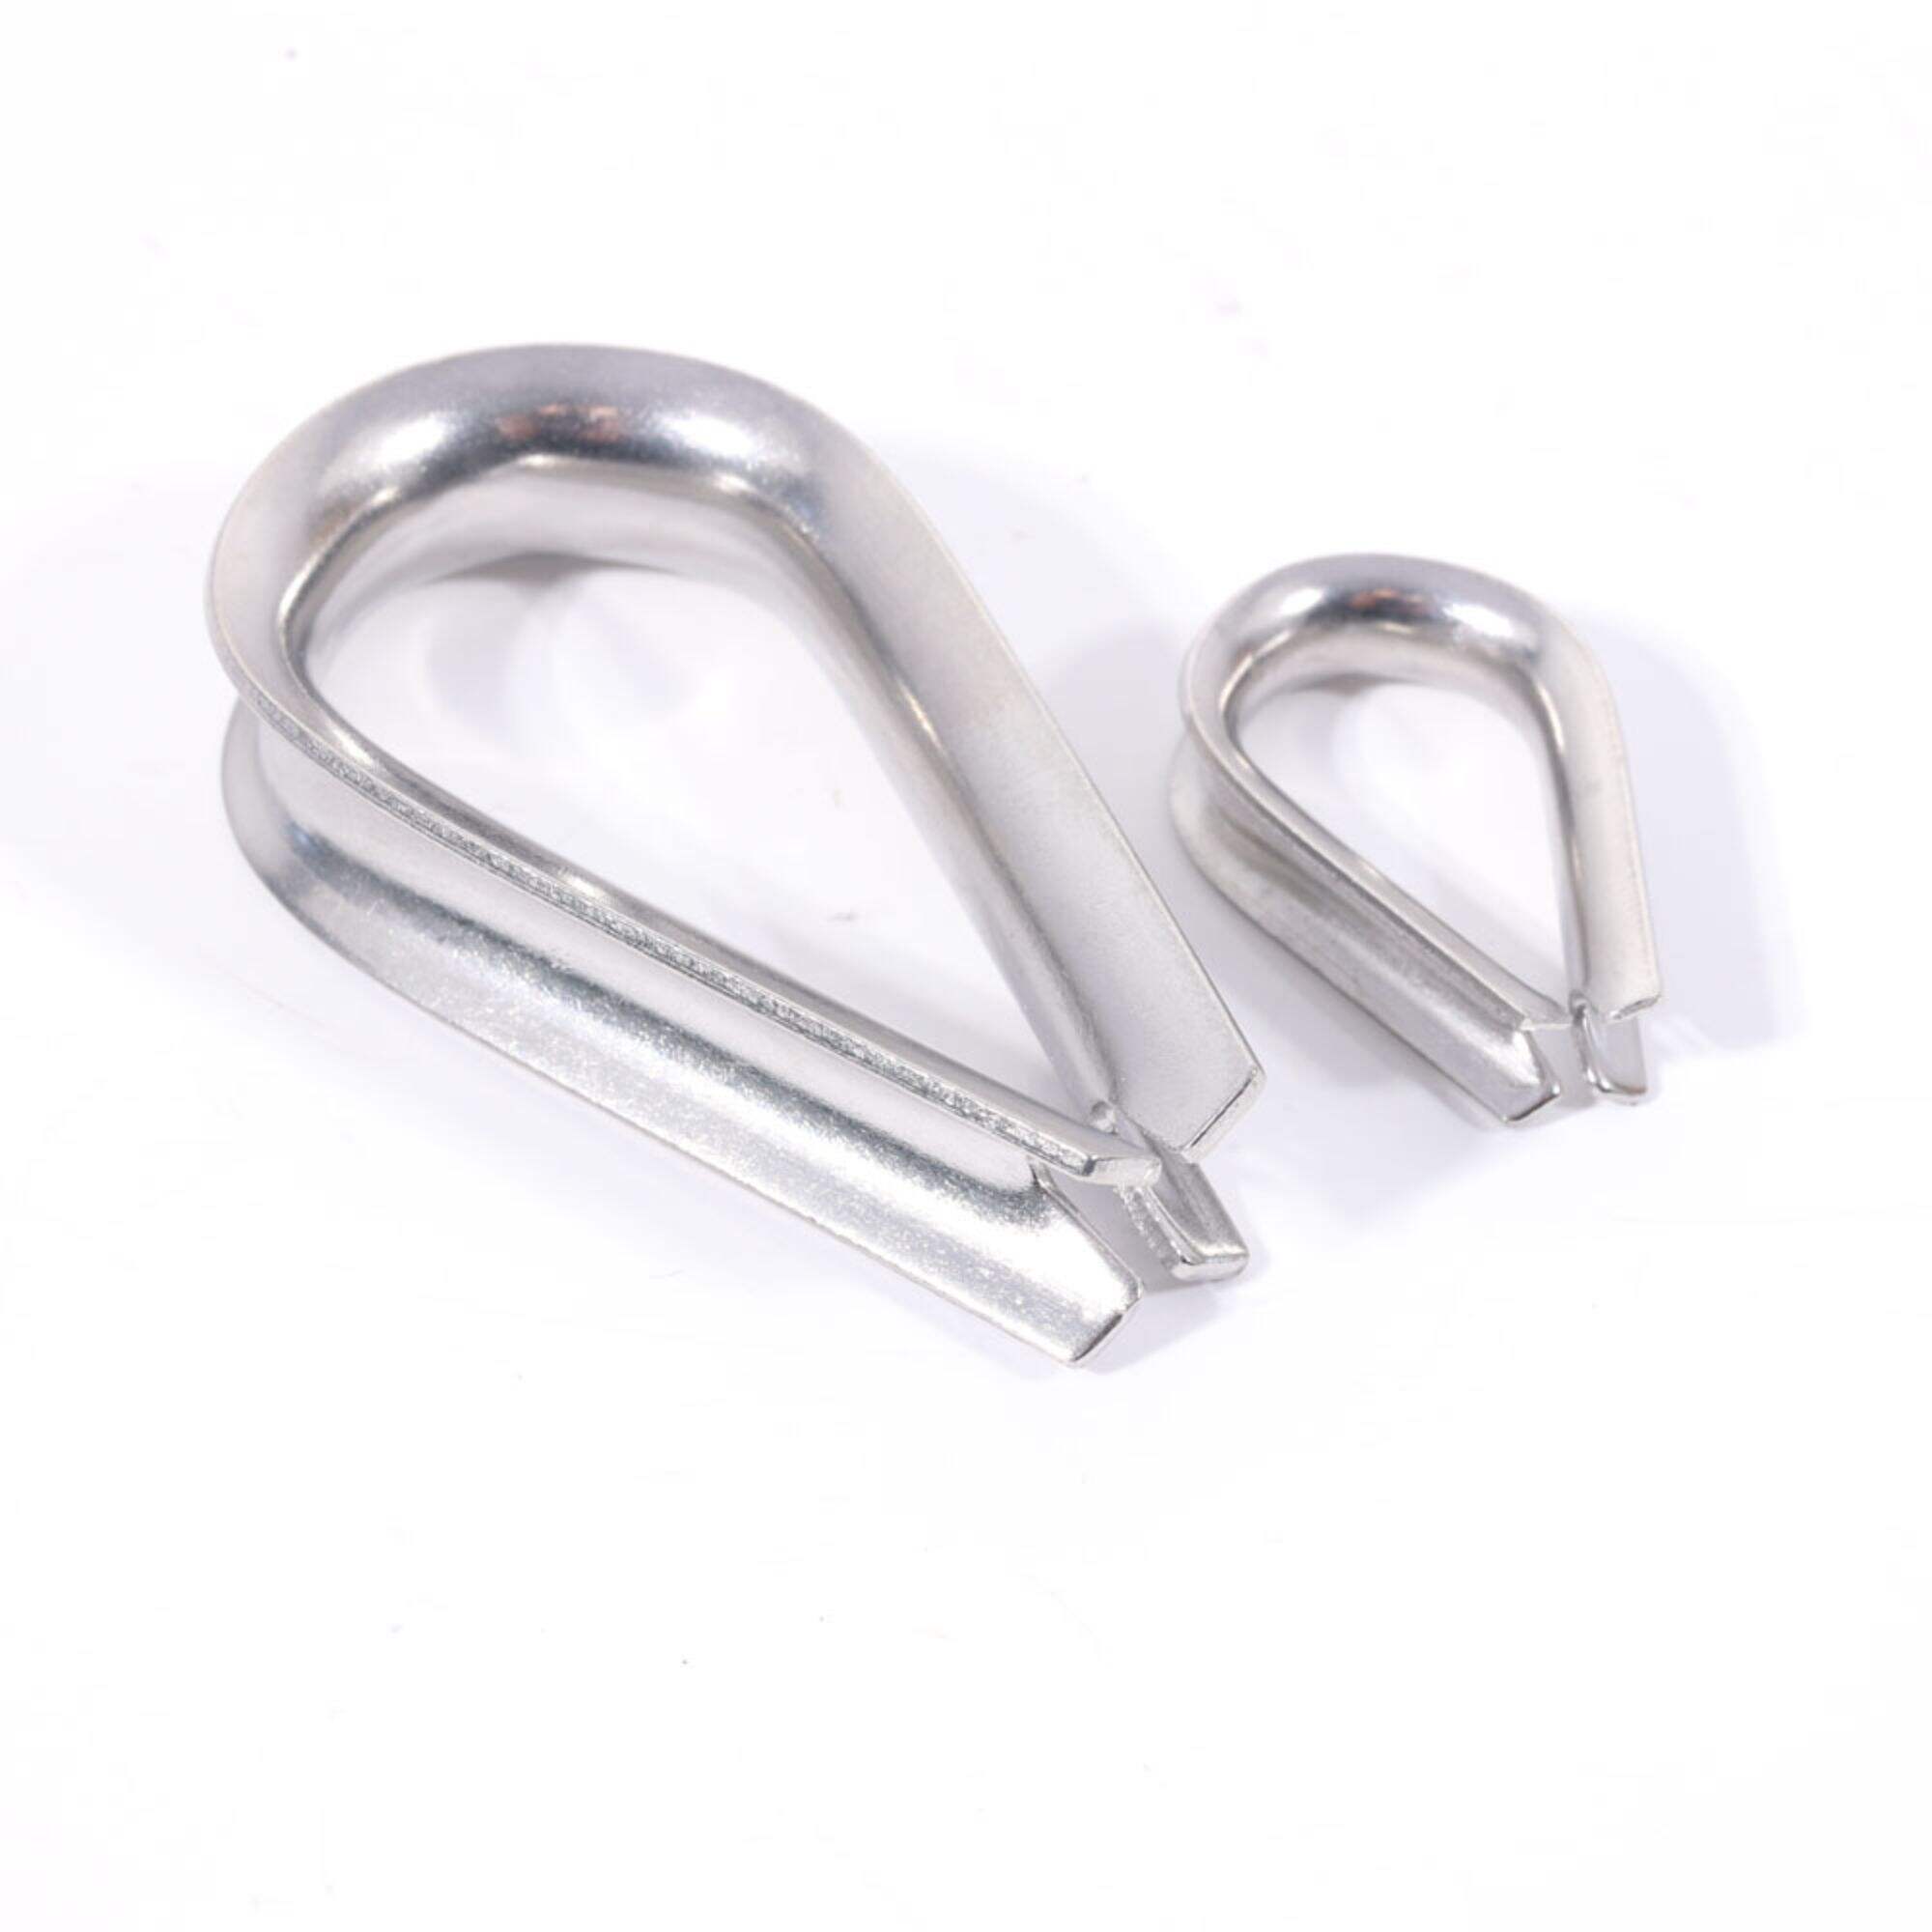 DIN6899B Small M2-M26 A2 A4 Stainless Steel 3mm 10mm Wire Rope Thimble